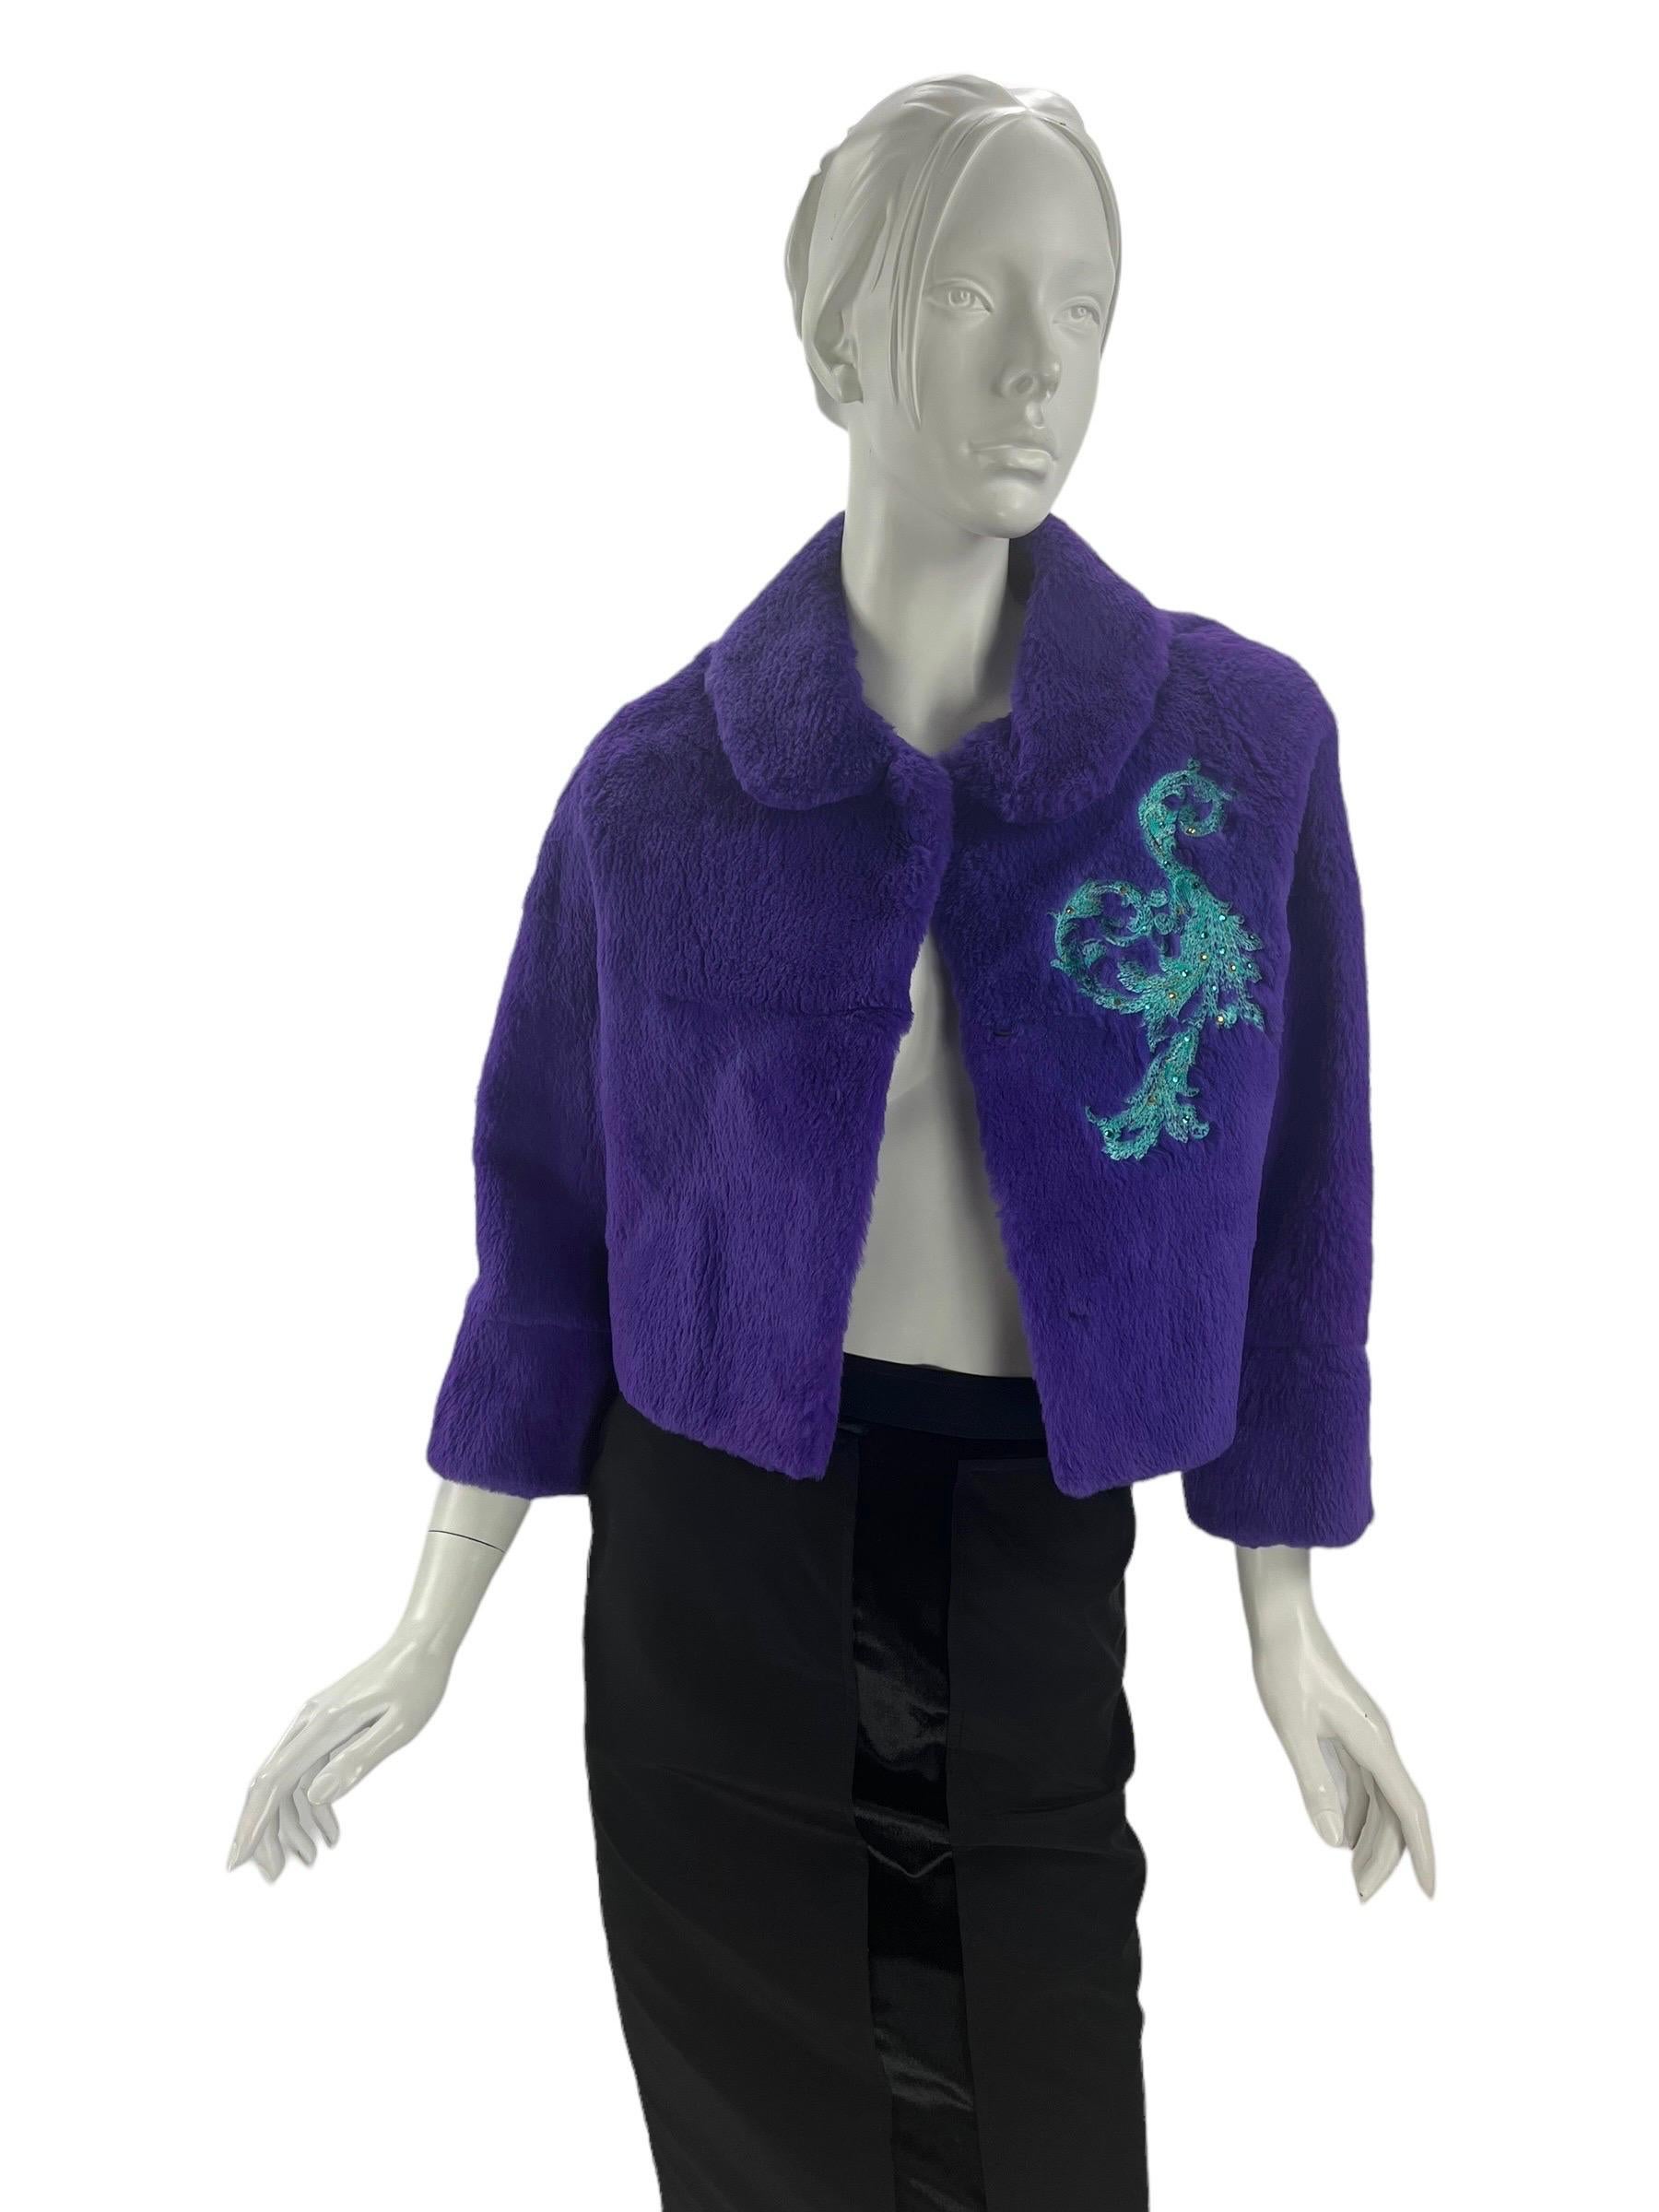 2001 Rare Vintage Versace Sample Jacket.
Lapin Fur with Crystal Embellished Embroidery.
Size S
3/4 sleeves, total length 20